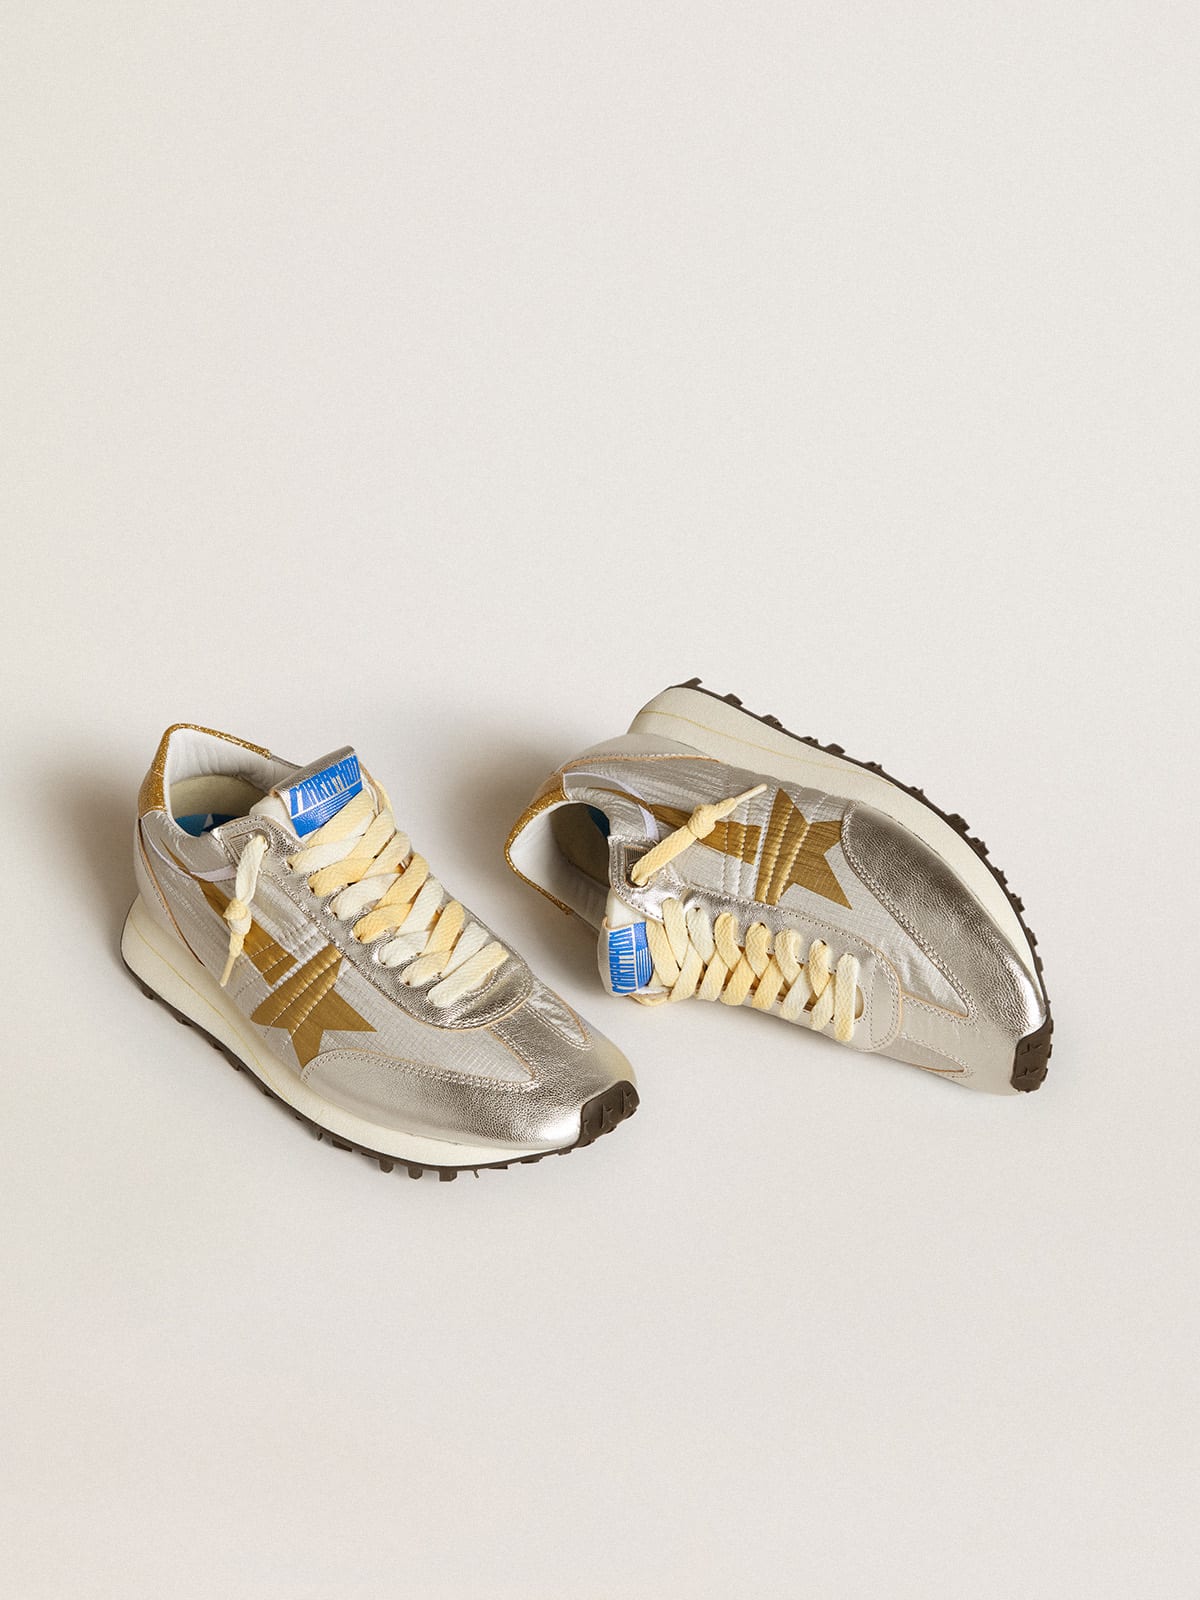 Golden Goose - Women’s Marathon with silver ripstop nylon upper and gold star in 